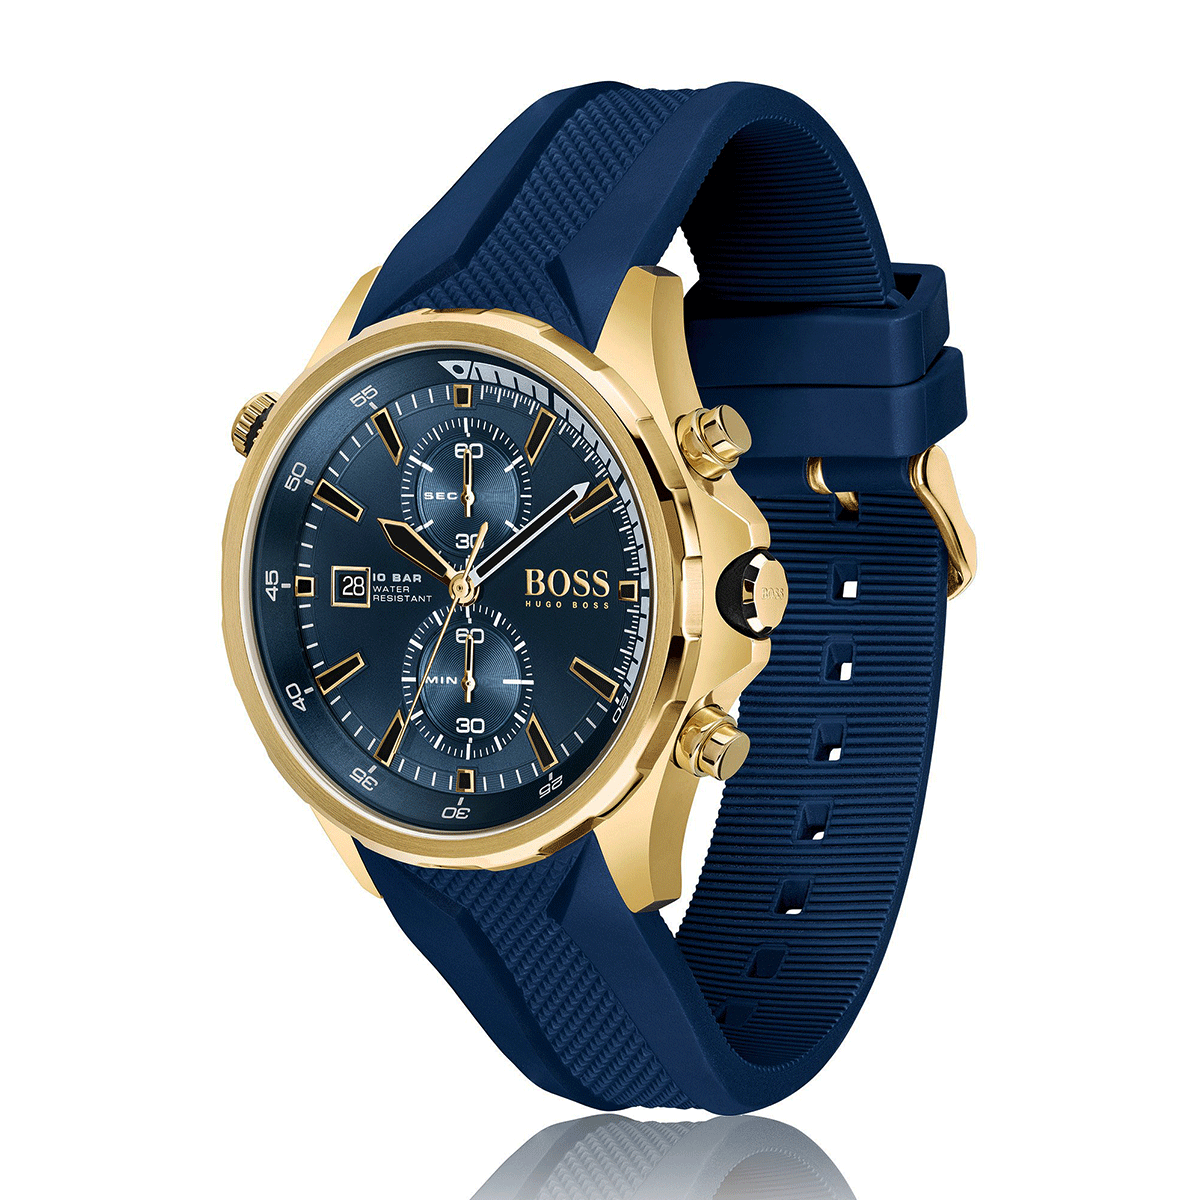 Men's Chronograph Watch With blue Silicone Strap